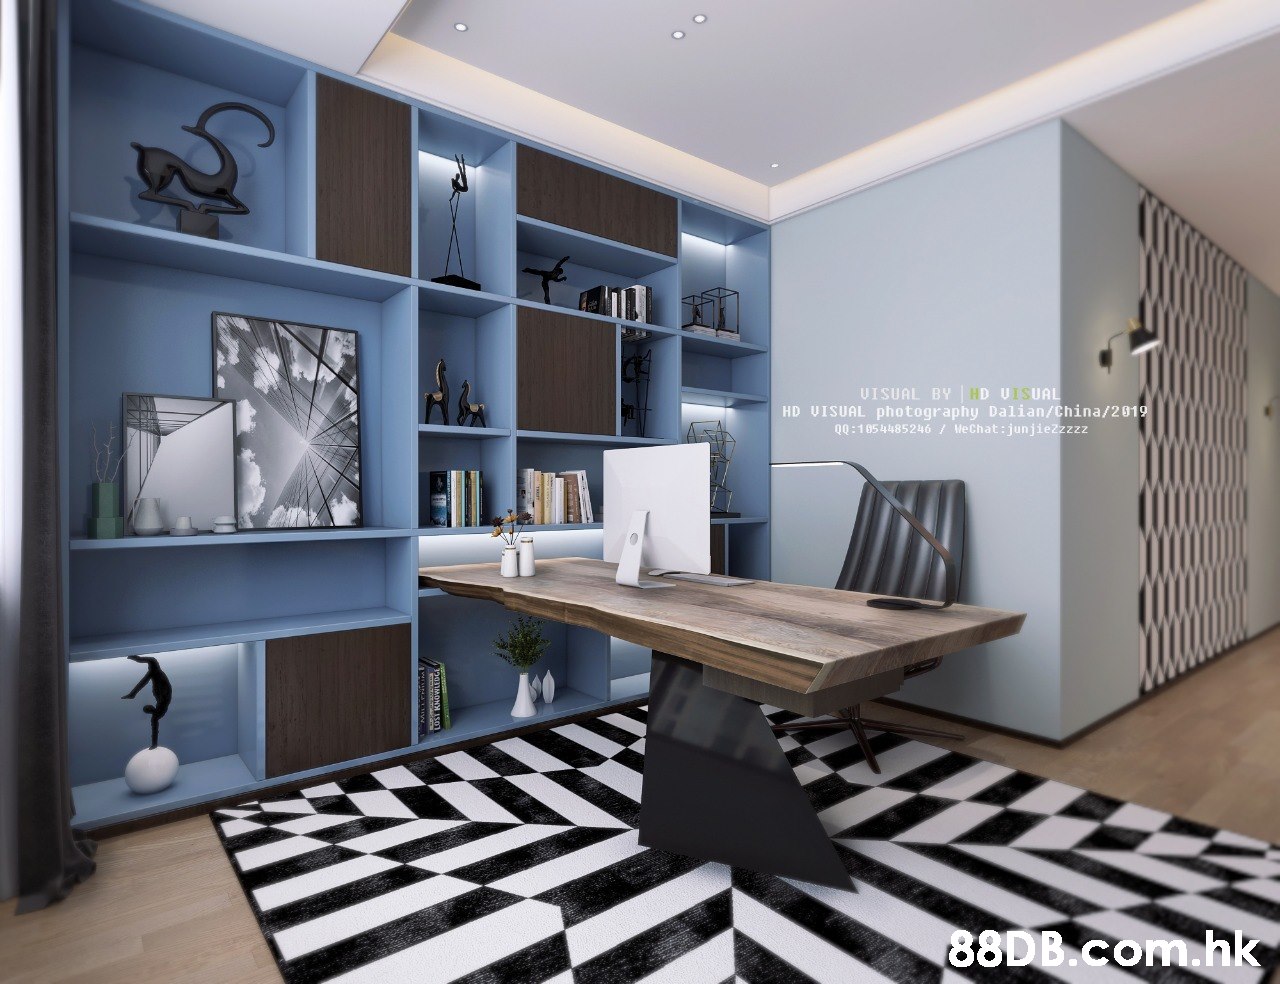 UISUAL BY HD UISUAL HD VISUAL photography Dalian/China/2019 QQ:1054485246 / MeChat:junjiezzzzz .hk  Room,Furniture,Interior design,Black-and-white,Living room